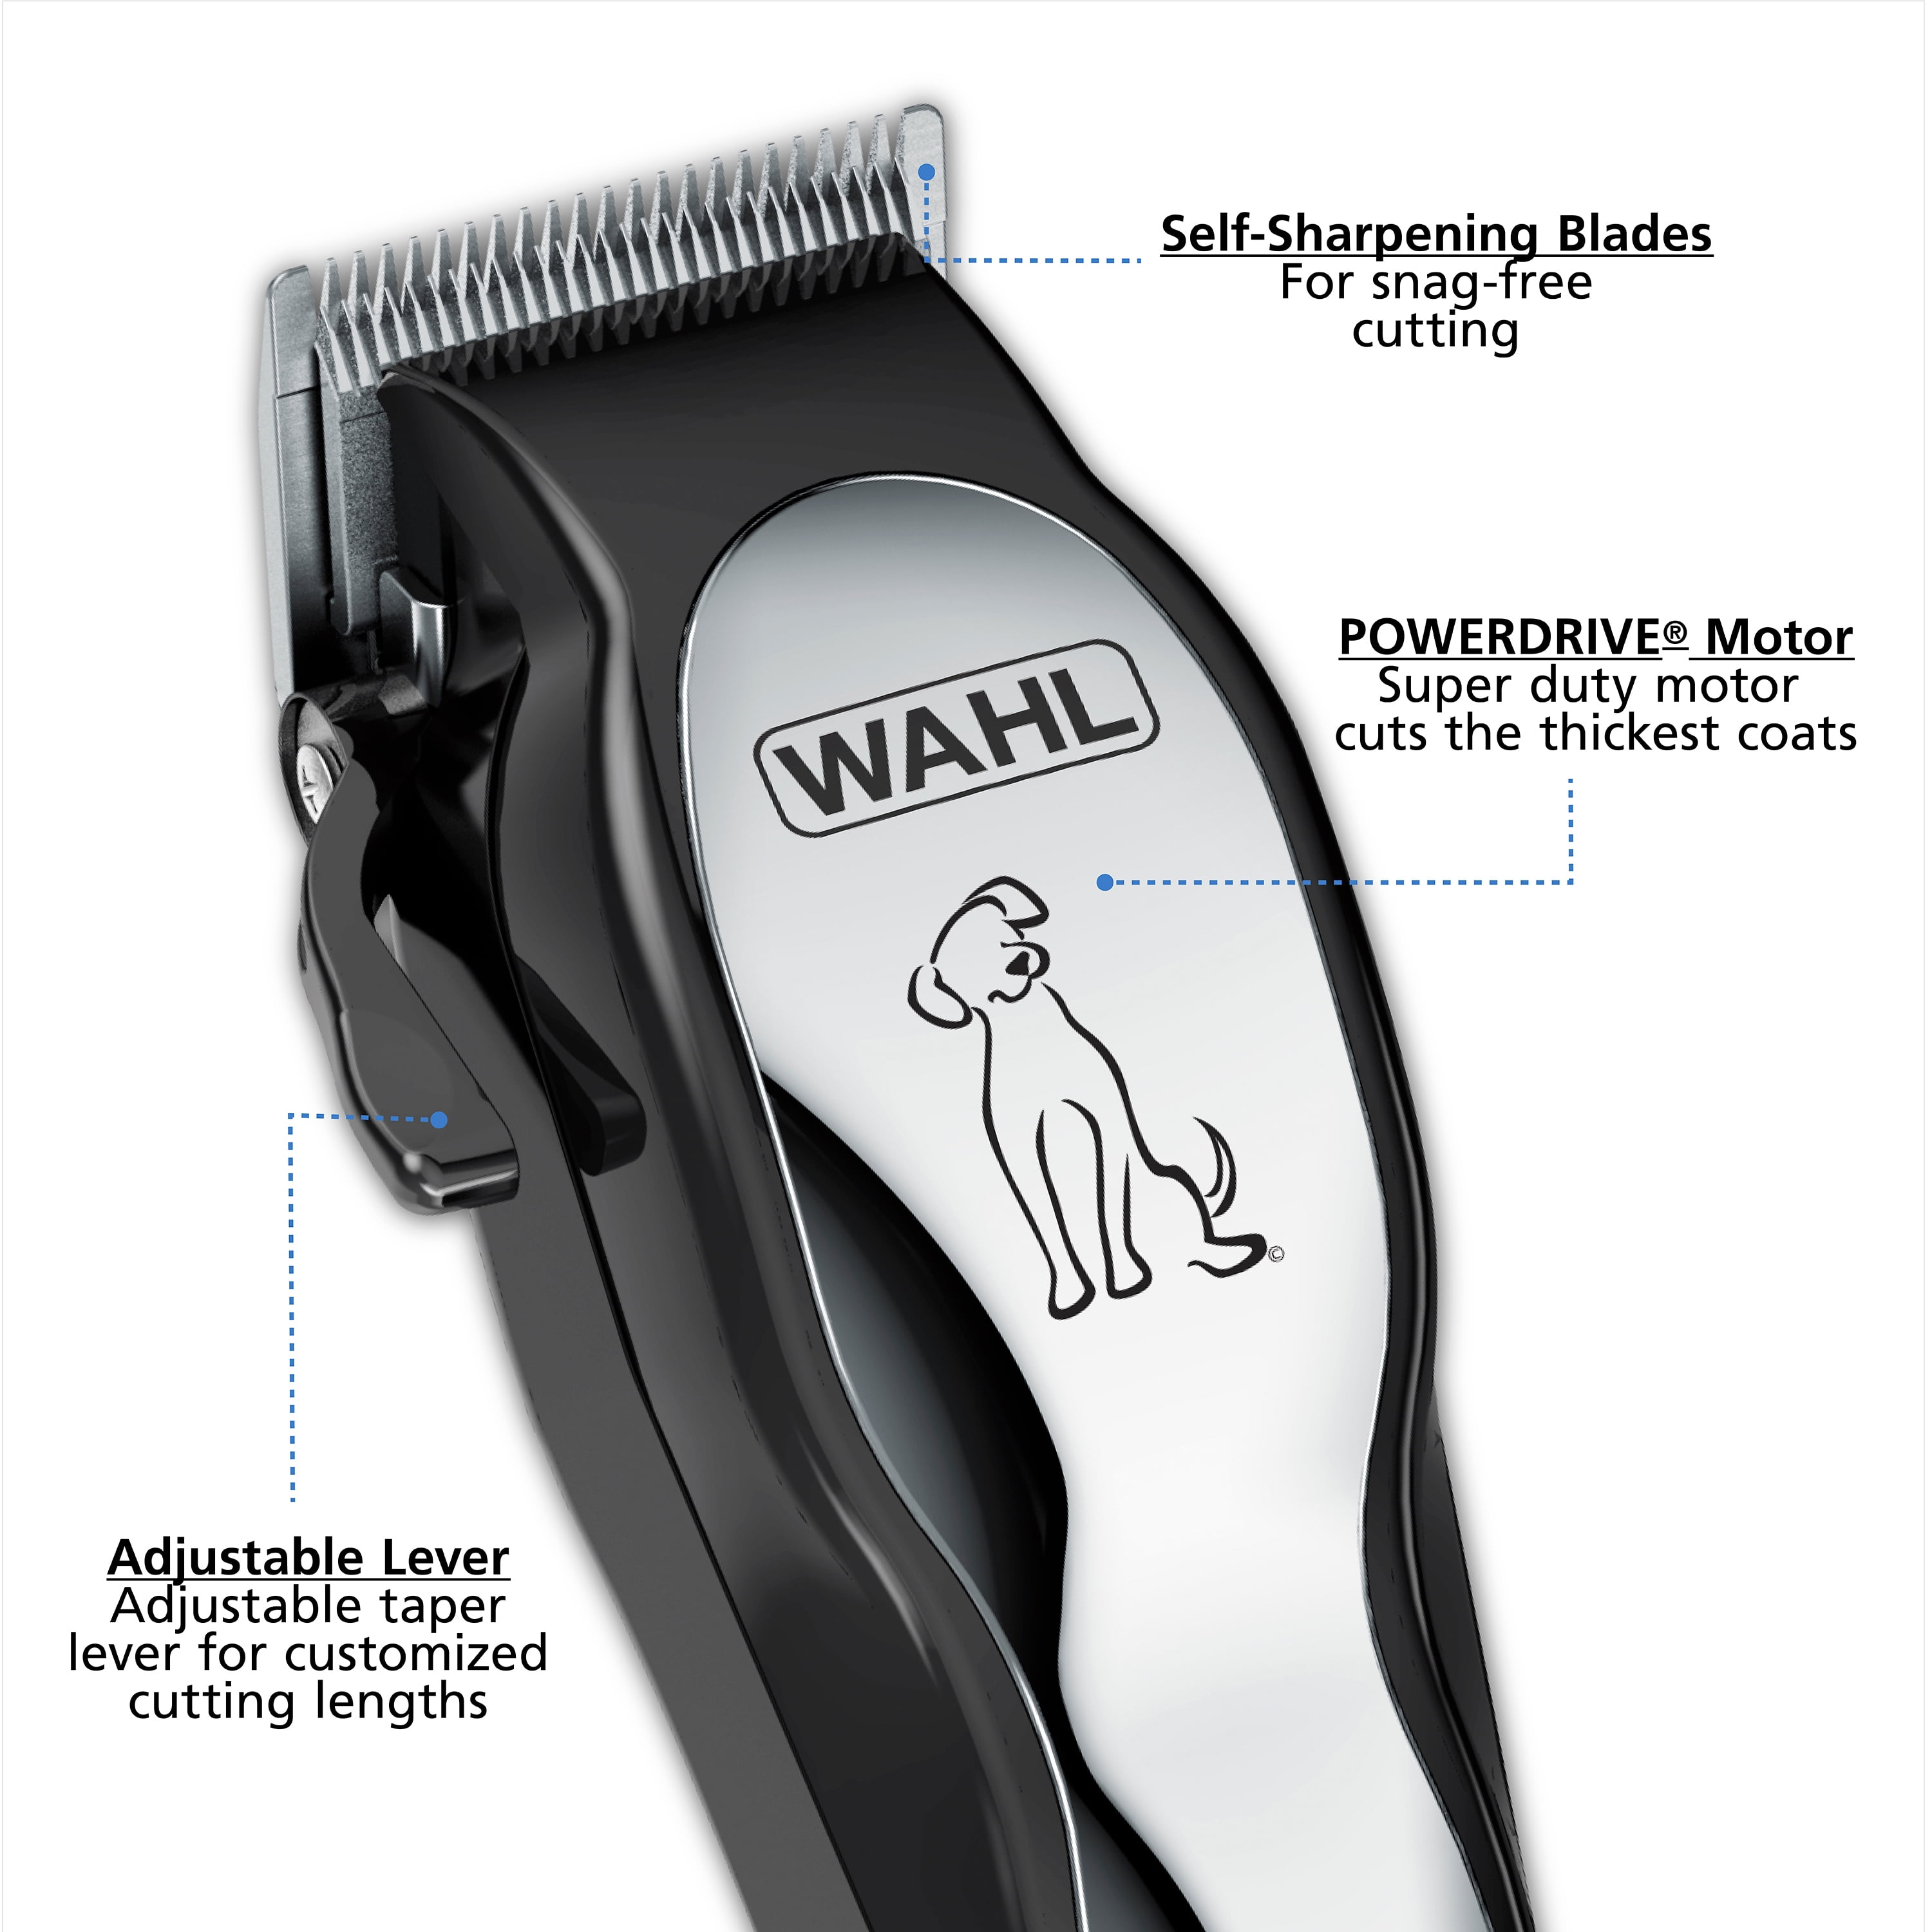 Wahl Pet Clipper Hair Cutting Kit for touch ups between professional grooming to your dog or cut by The Brand Used By Professionals #9160-210 